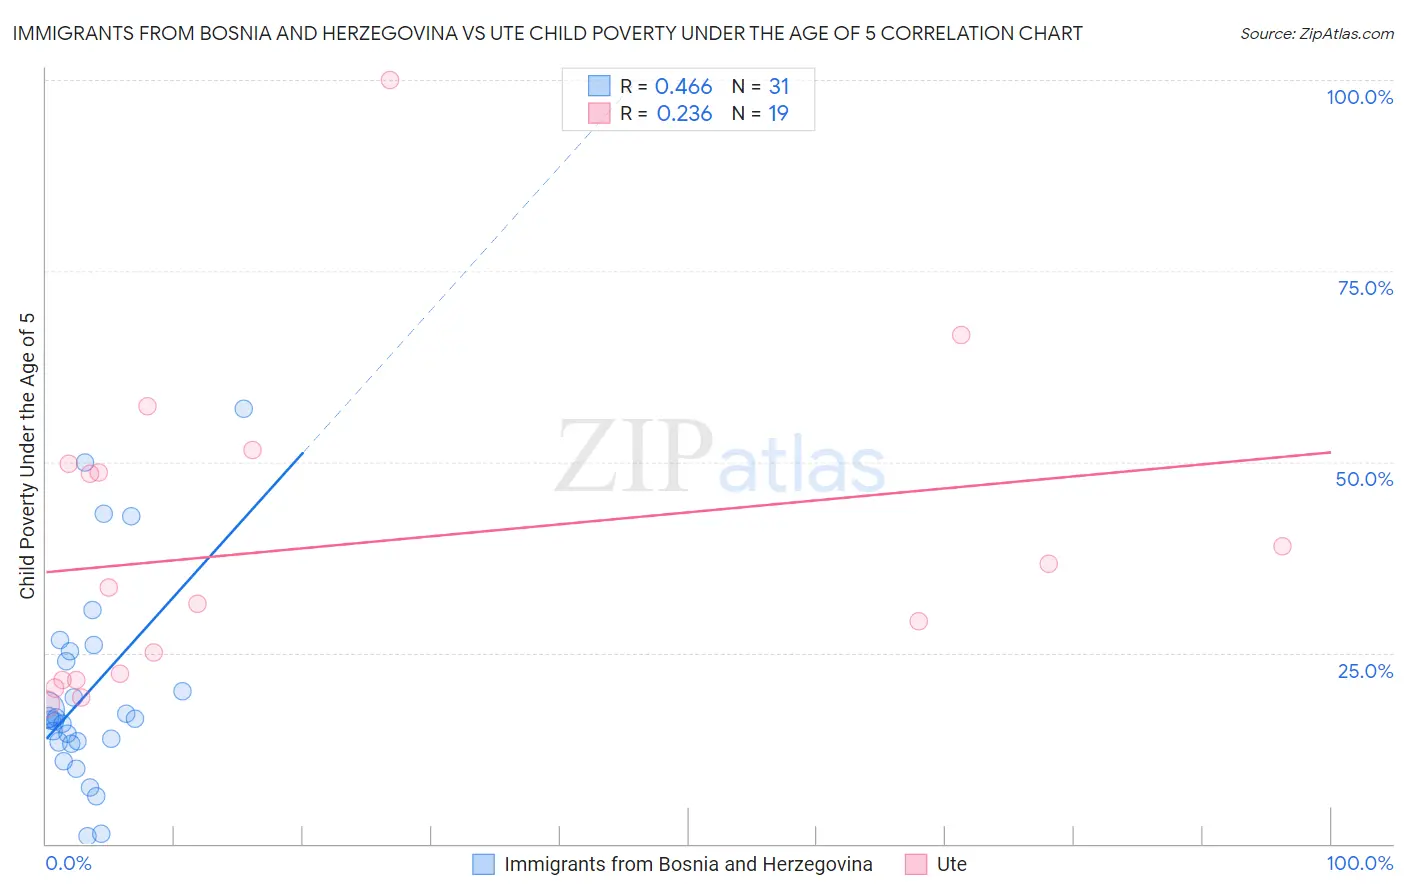 Immigrants from Bosnia and Herzegovina vs Ute Child Poverty Under the Age of 5